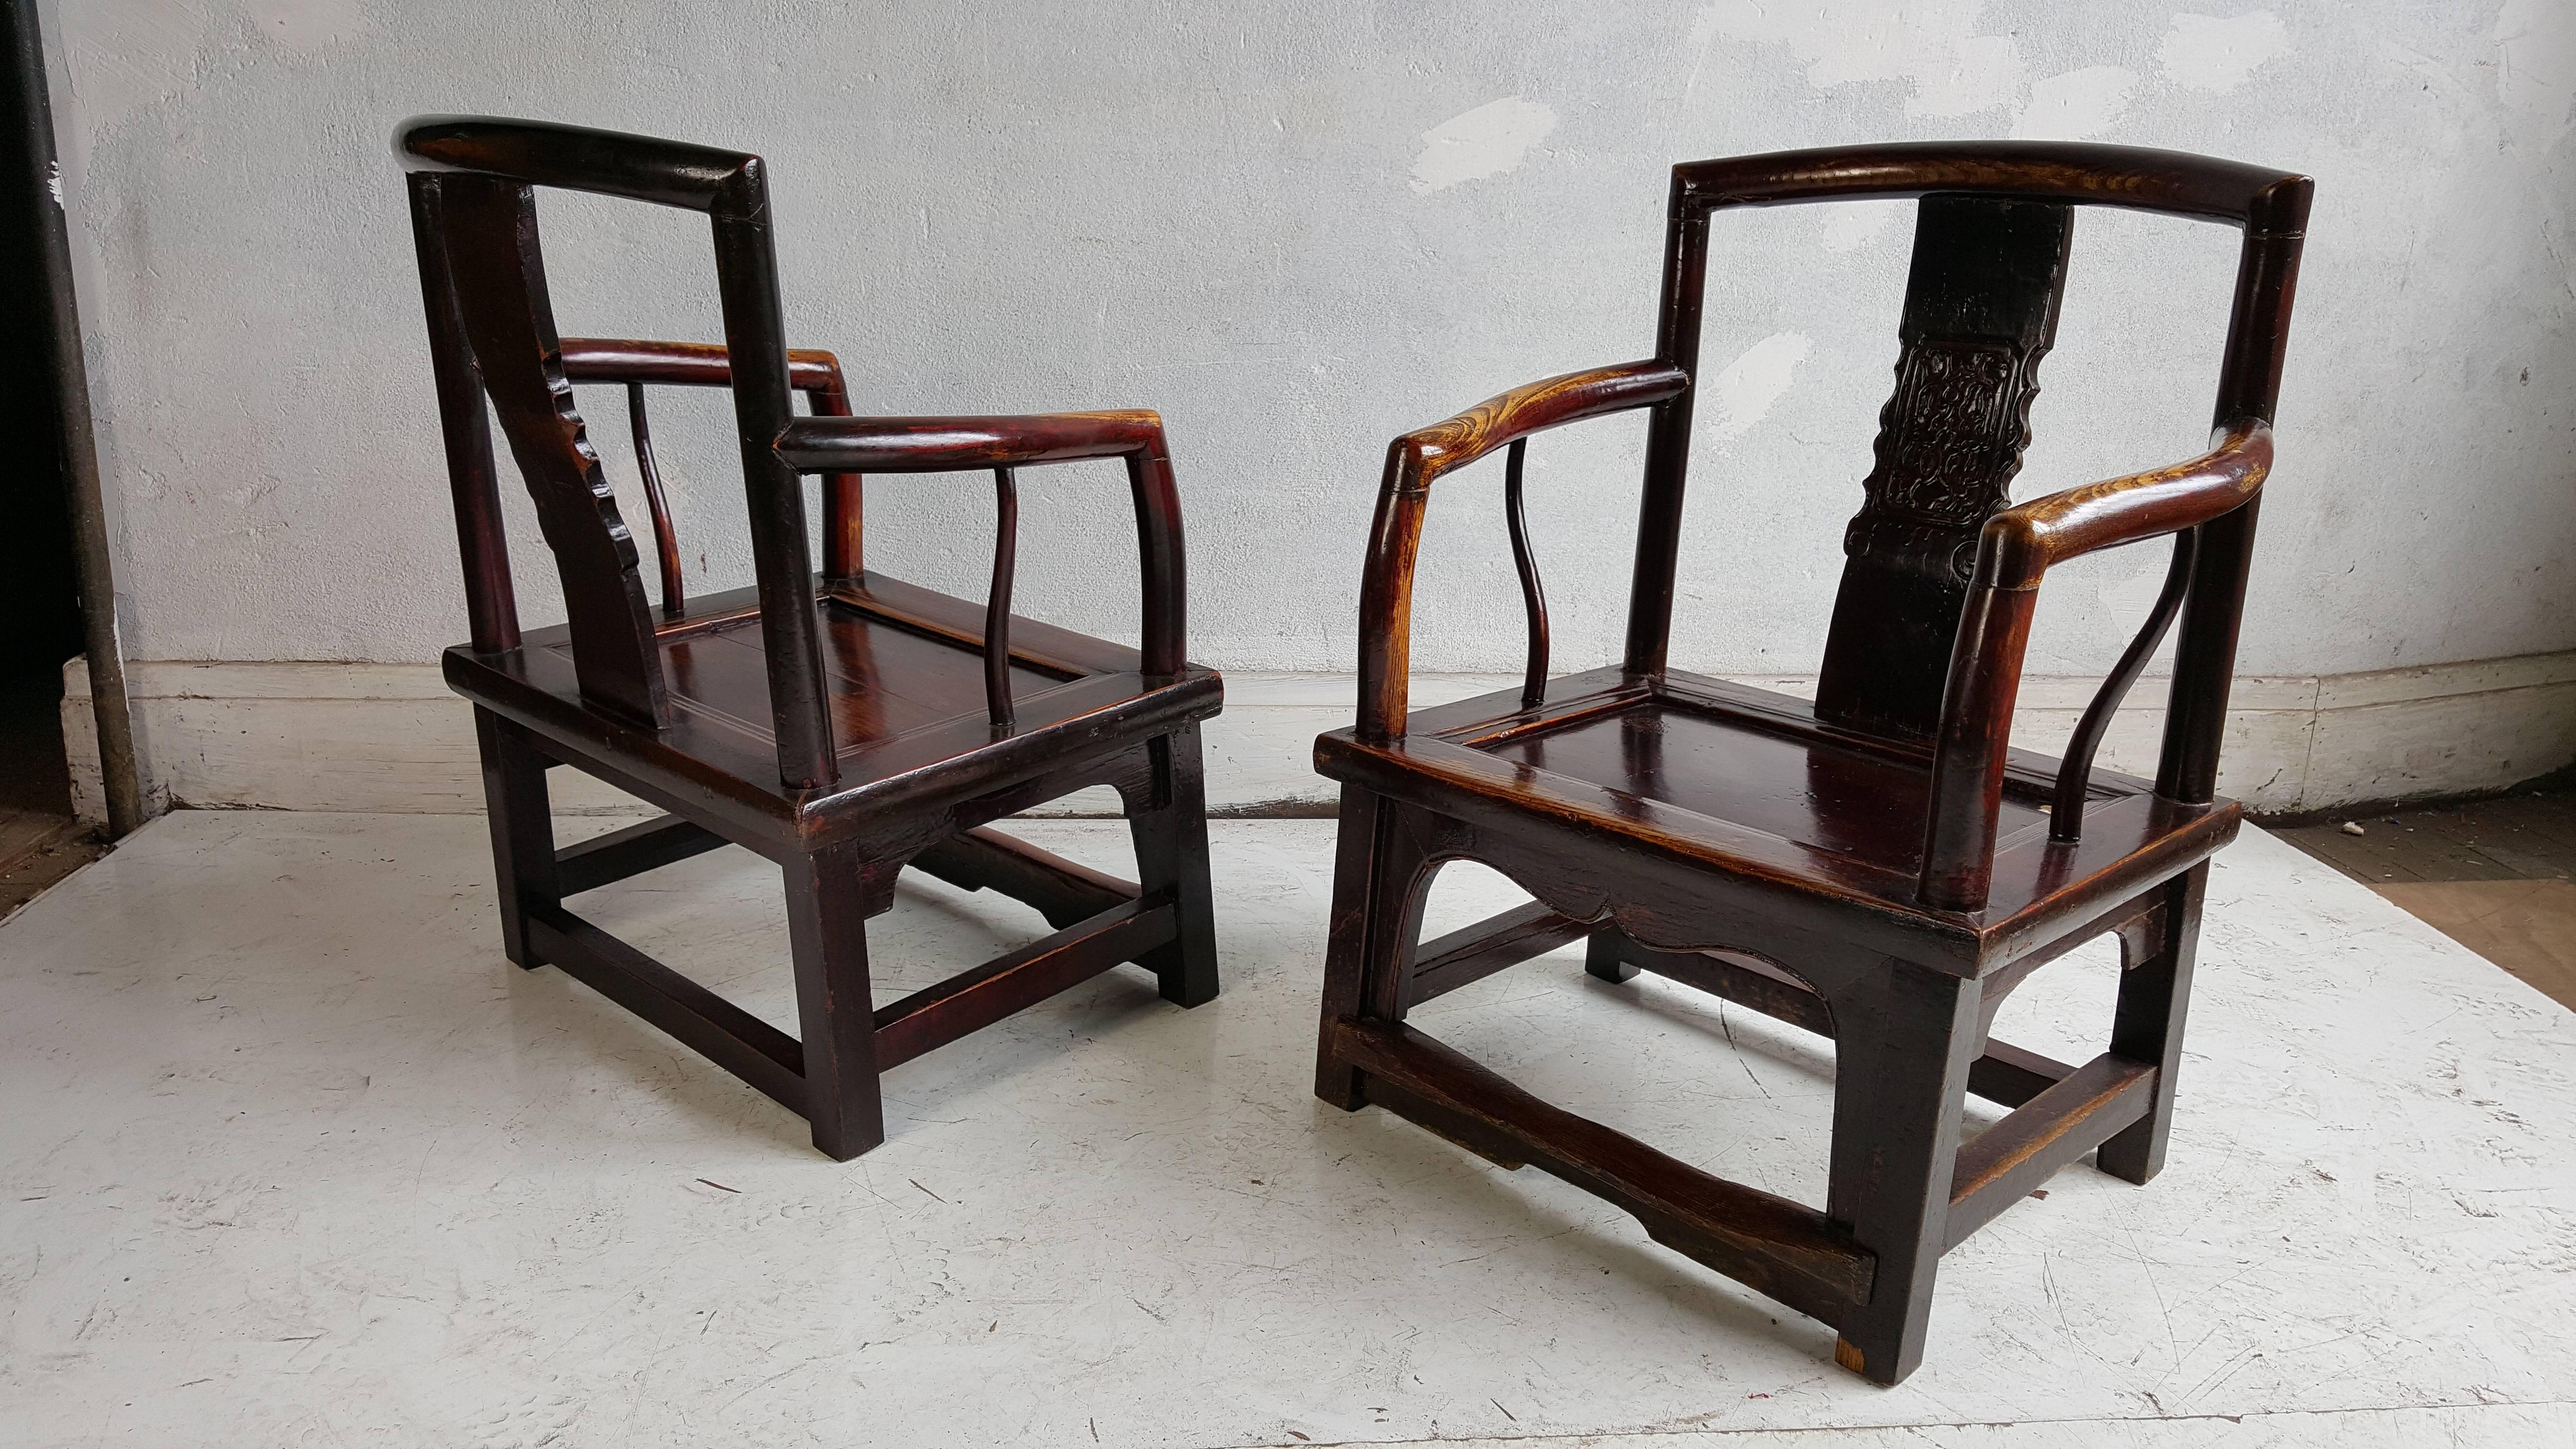 A finely crafted set, four Chinese official's chairs. The center yoke back panel has elegantly carved section. The front leg apron is also beautifully carved. Retains foot rail joining legs. The lacquer finish on the chairs is original. Often this